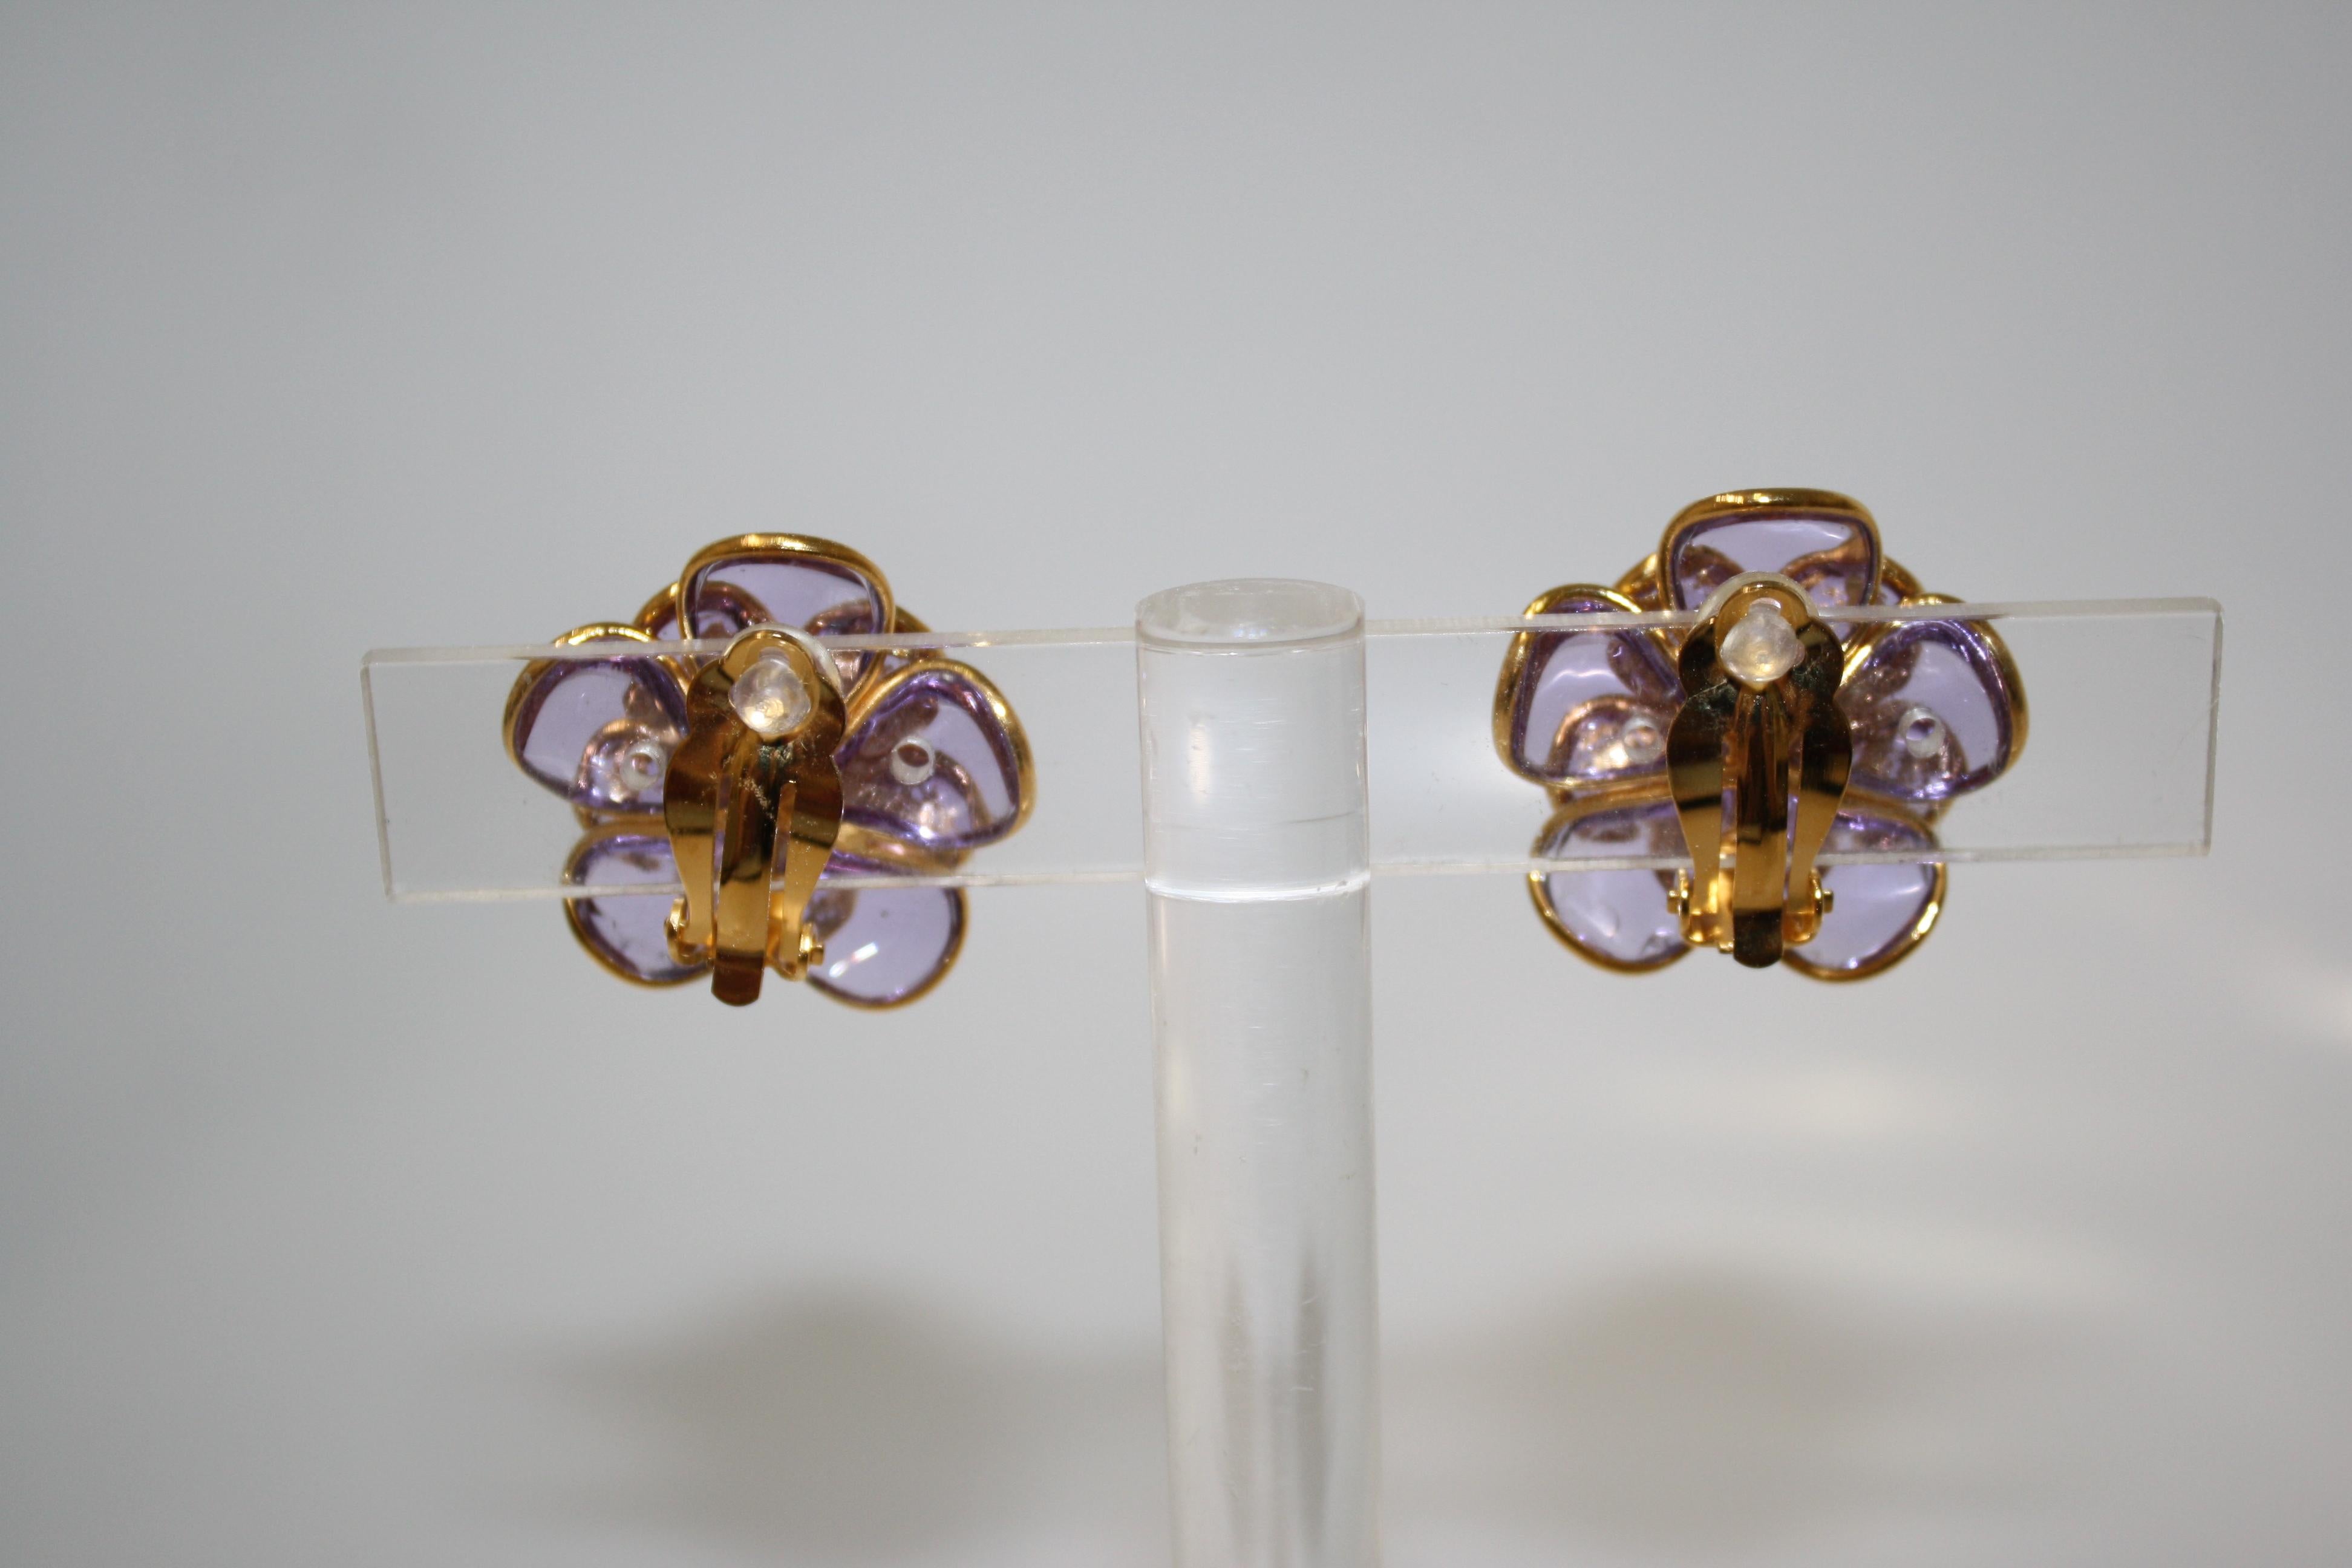 designed by the former artisans of the atelier of Gripoix, made in the special process of pate de verre or poured glass. Gold leaves are inserted in the glass. 18-carat gilded brass. Clip earrings